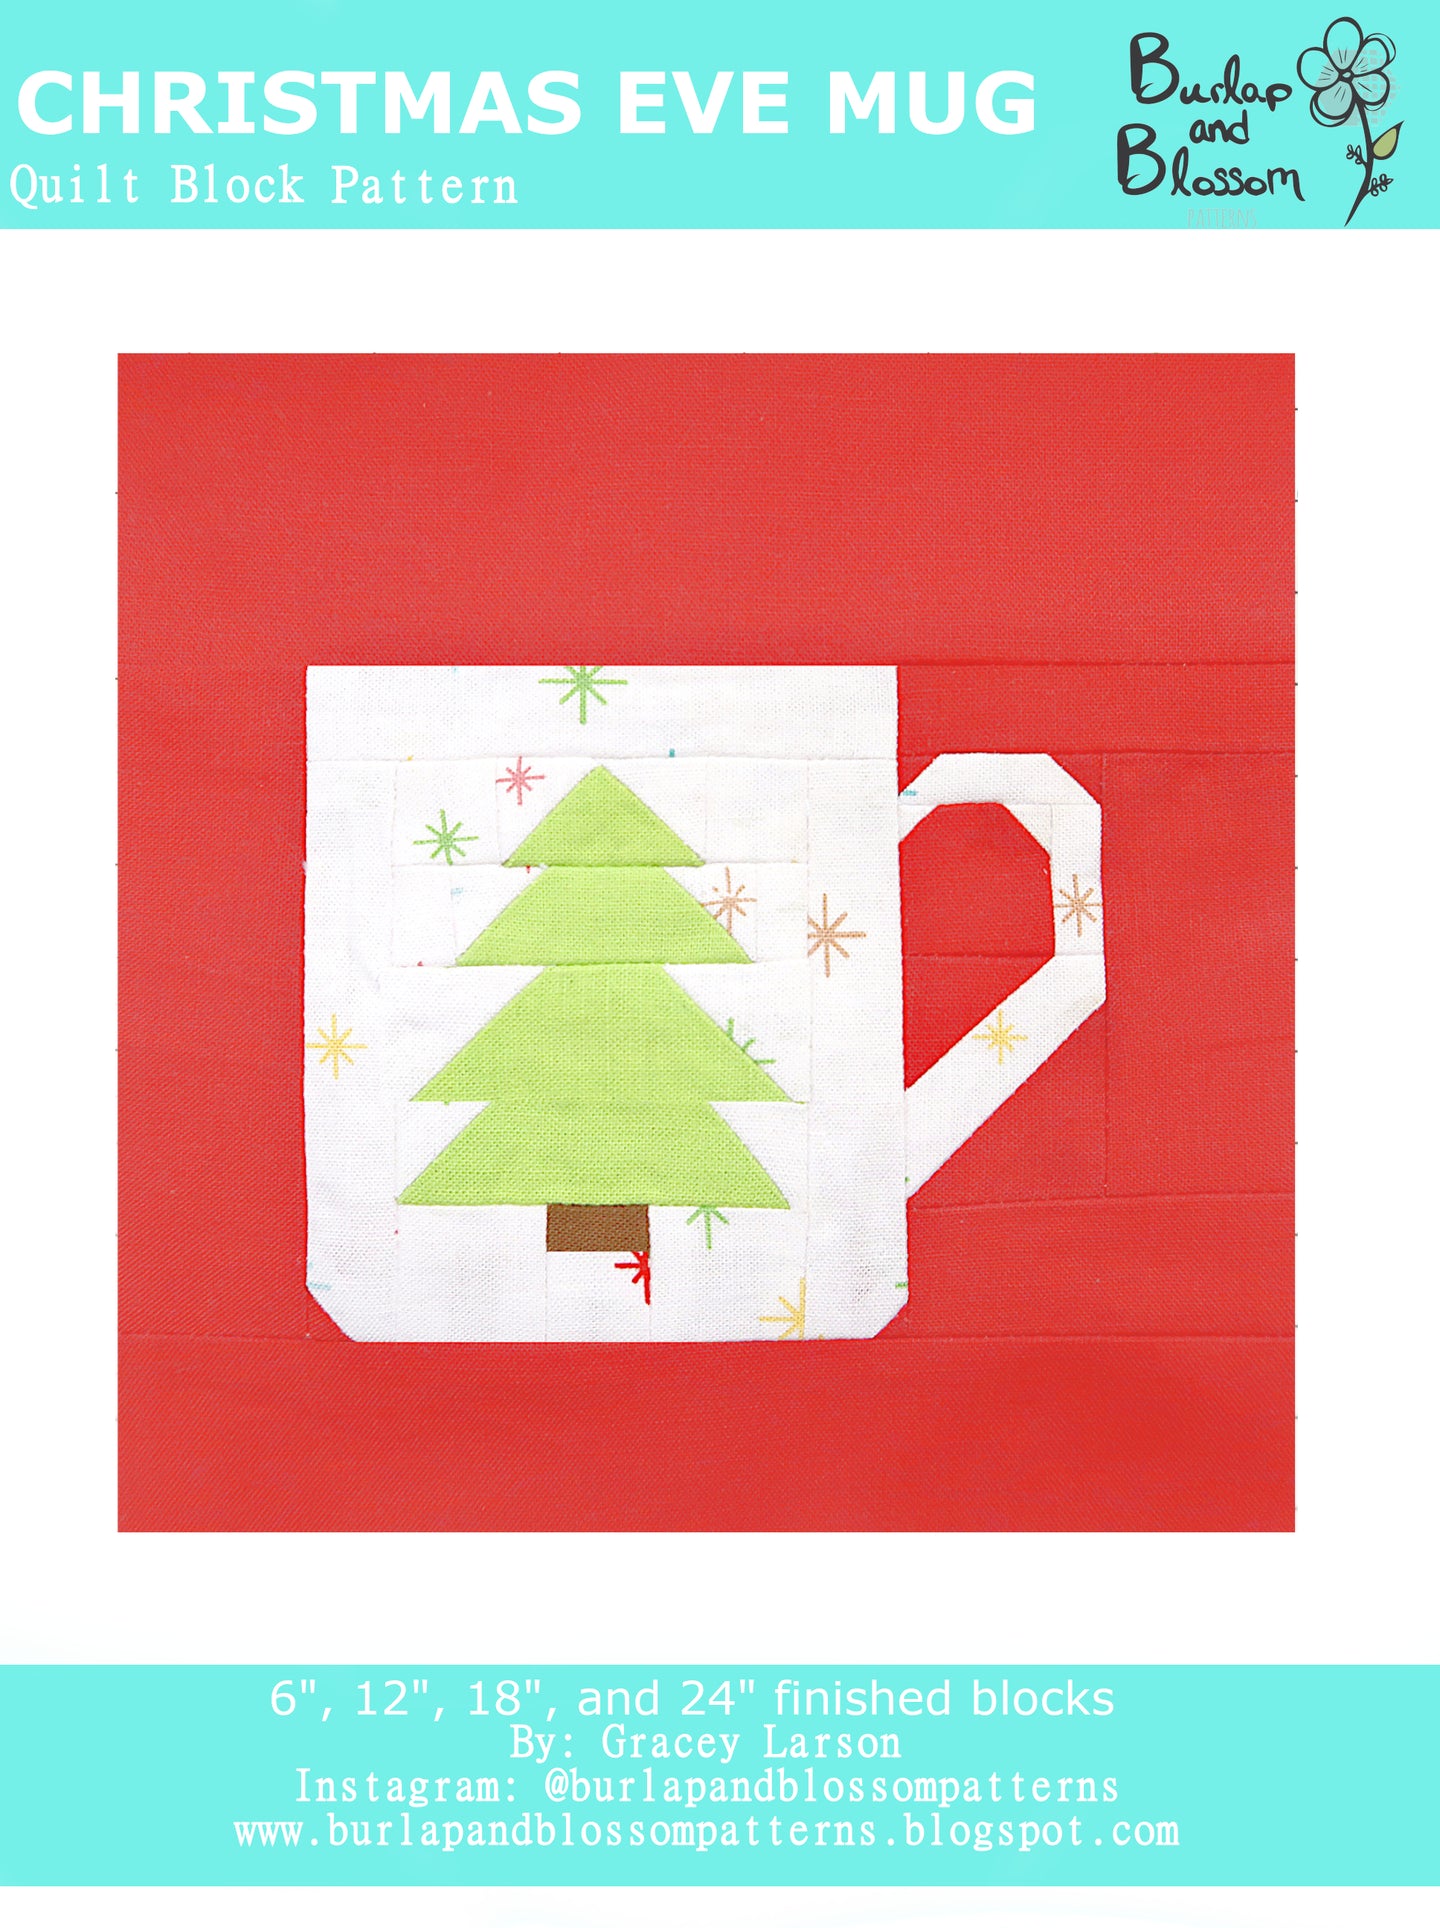 Pattern, Christmas Eve Mug Quilt Block by Burlap and Blossom (digital download)